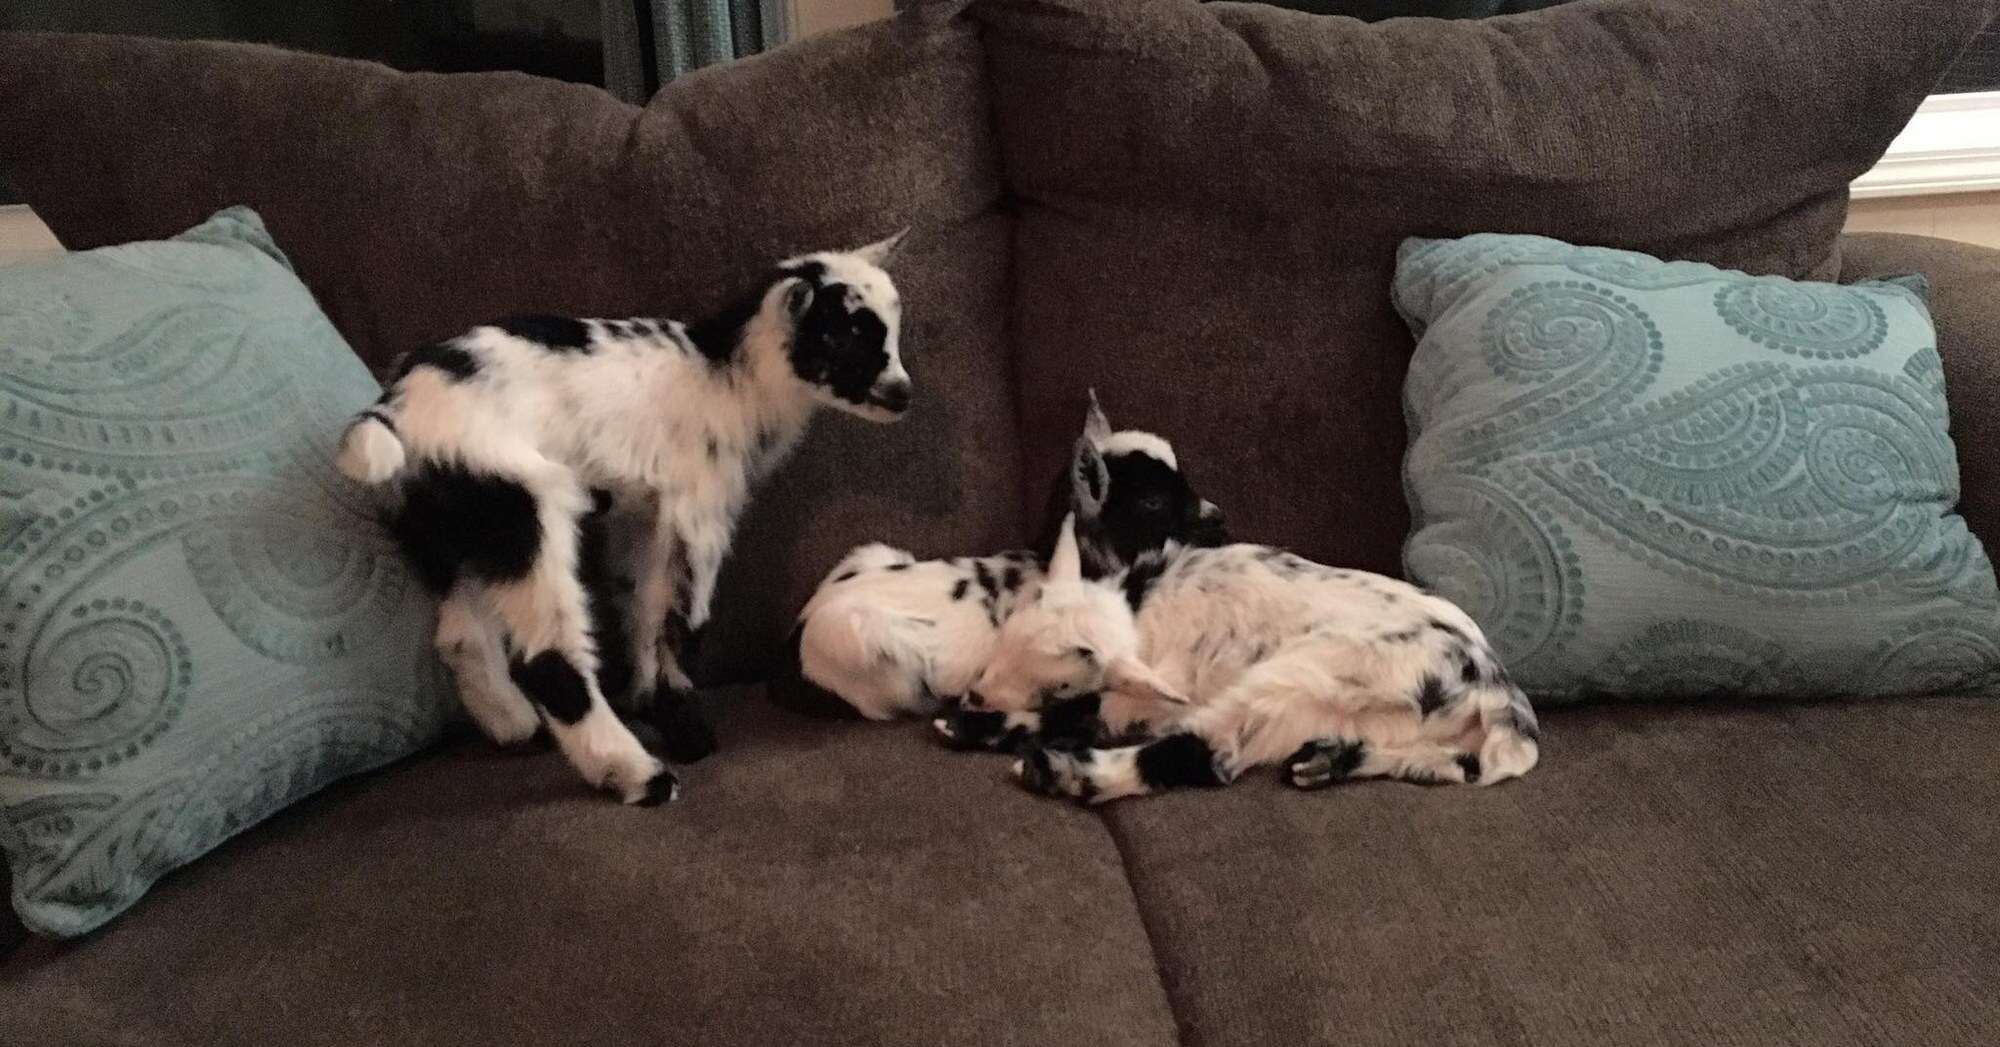 Orphaned baby goats settle in at sanctuary